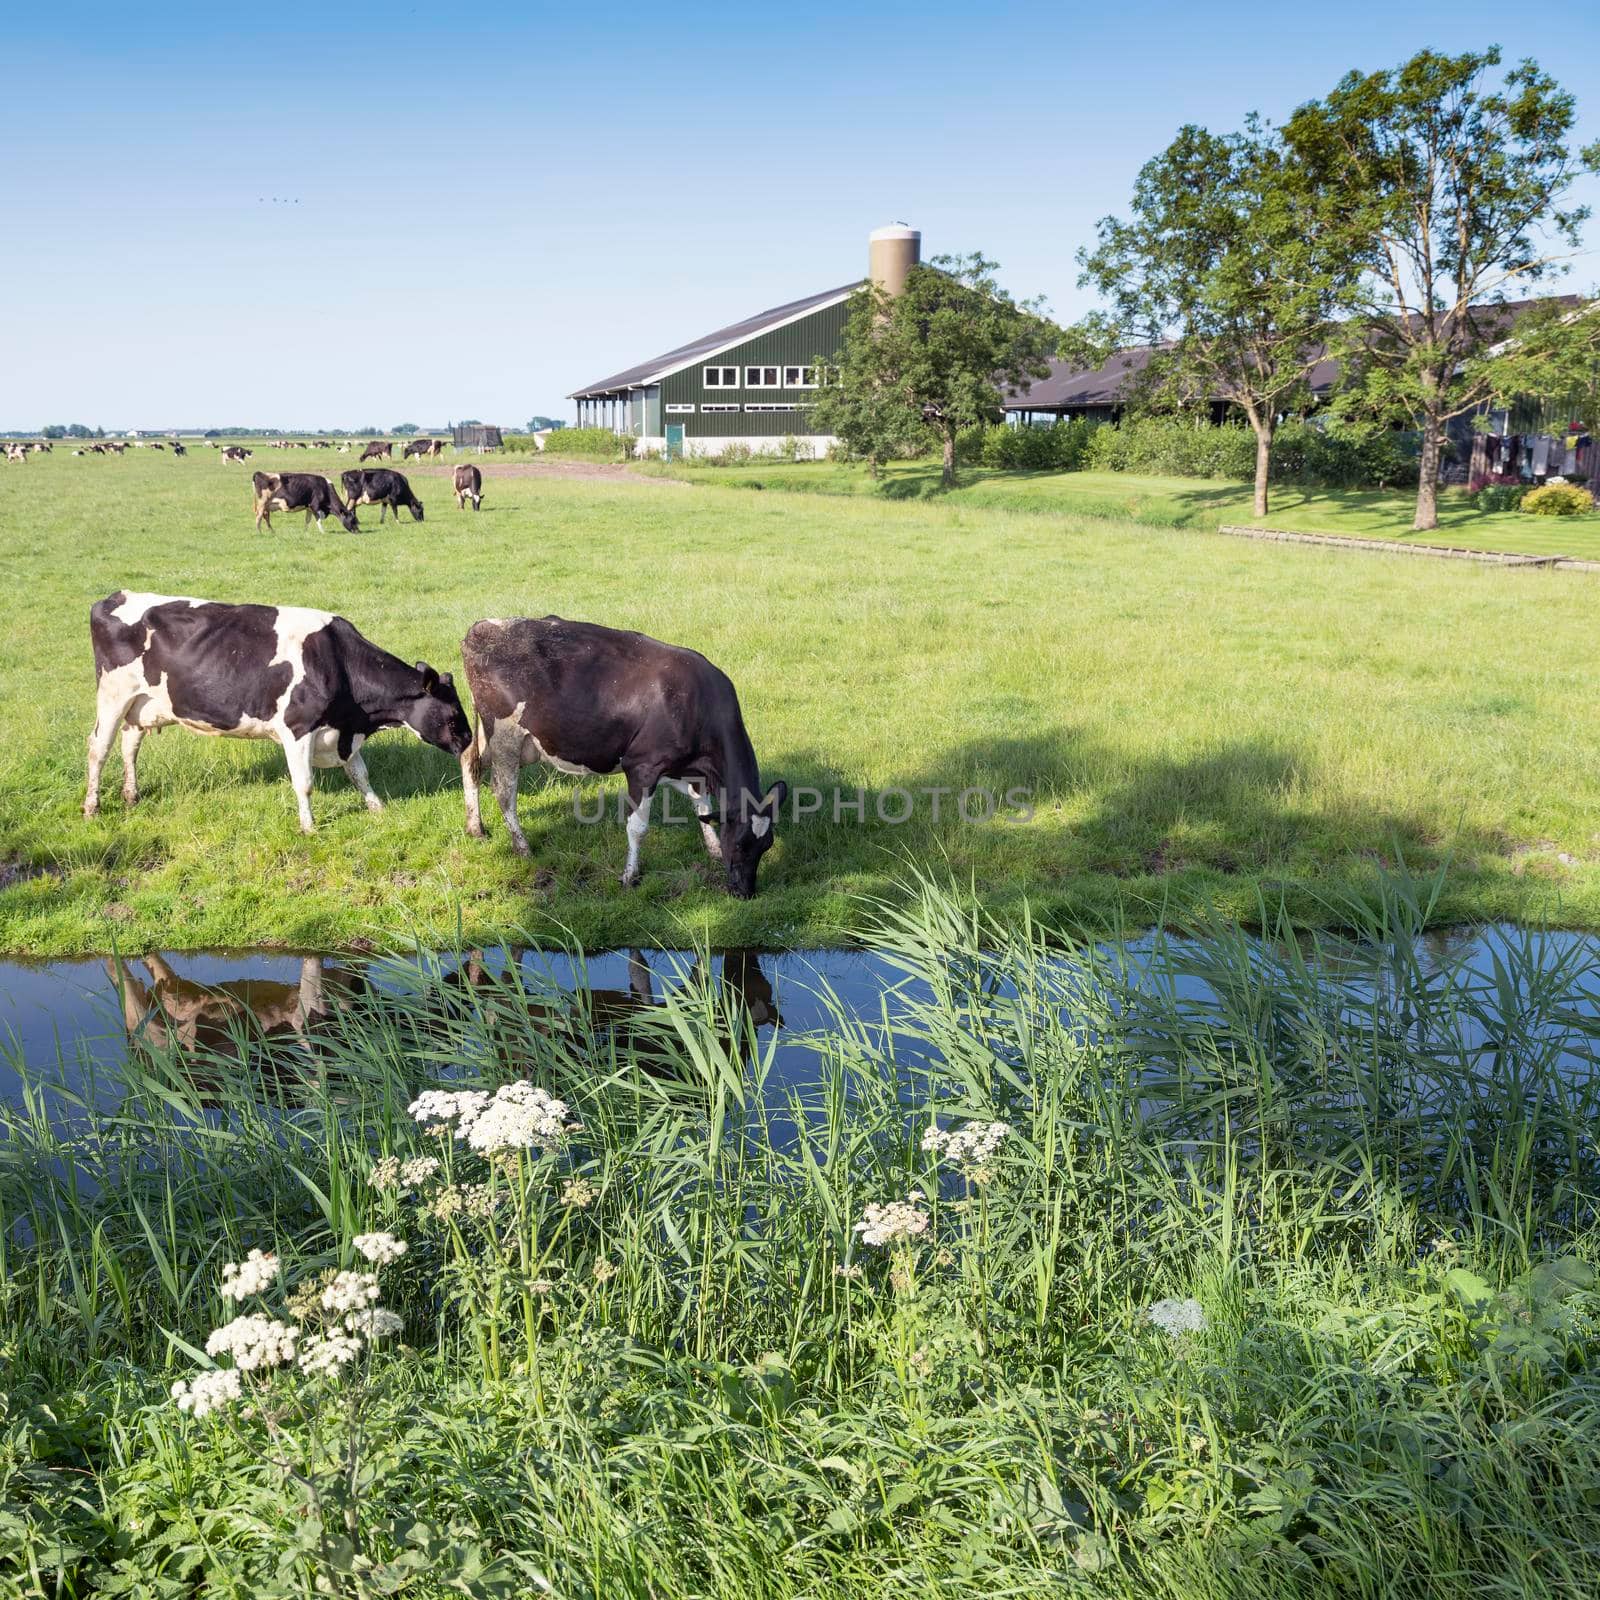 black and white spotted cows stand in meadow near farm in dutch province of noord holland by ahavelaar